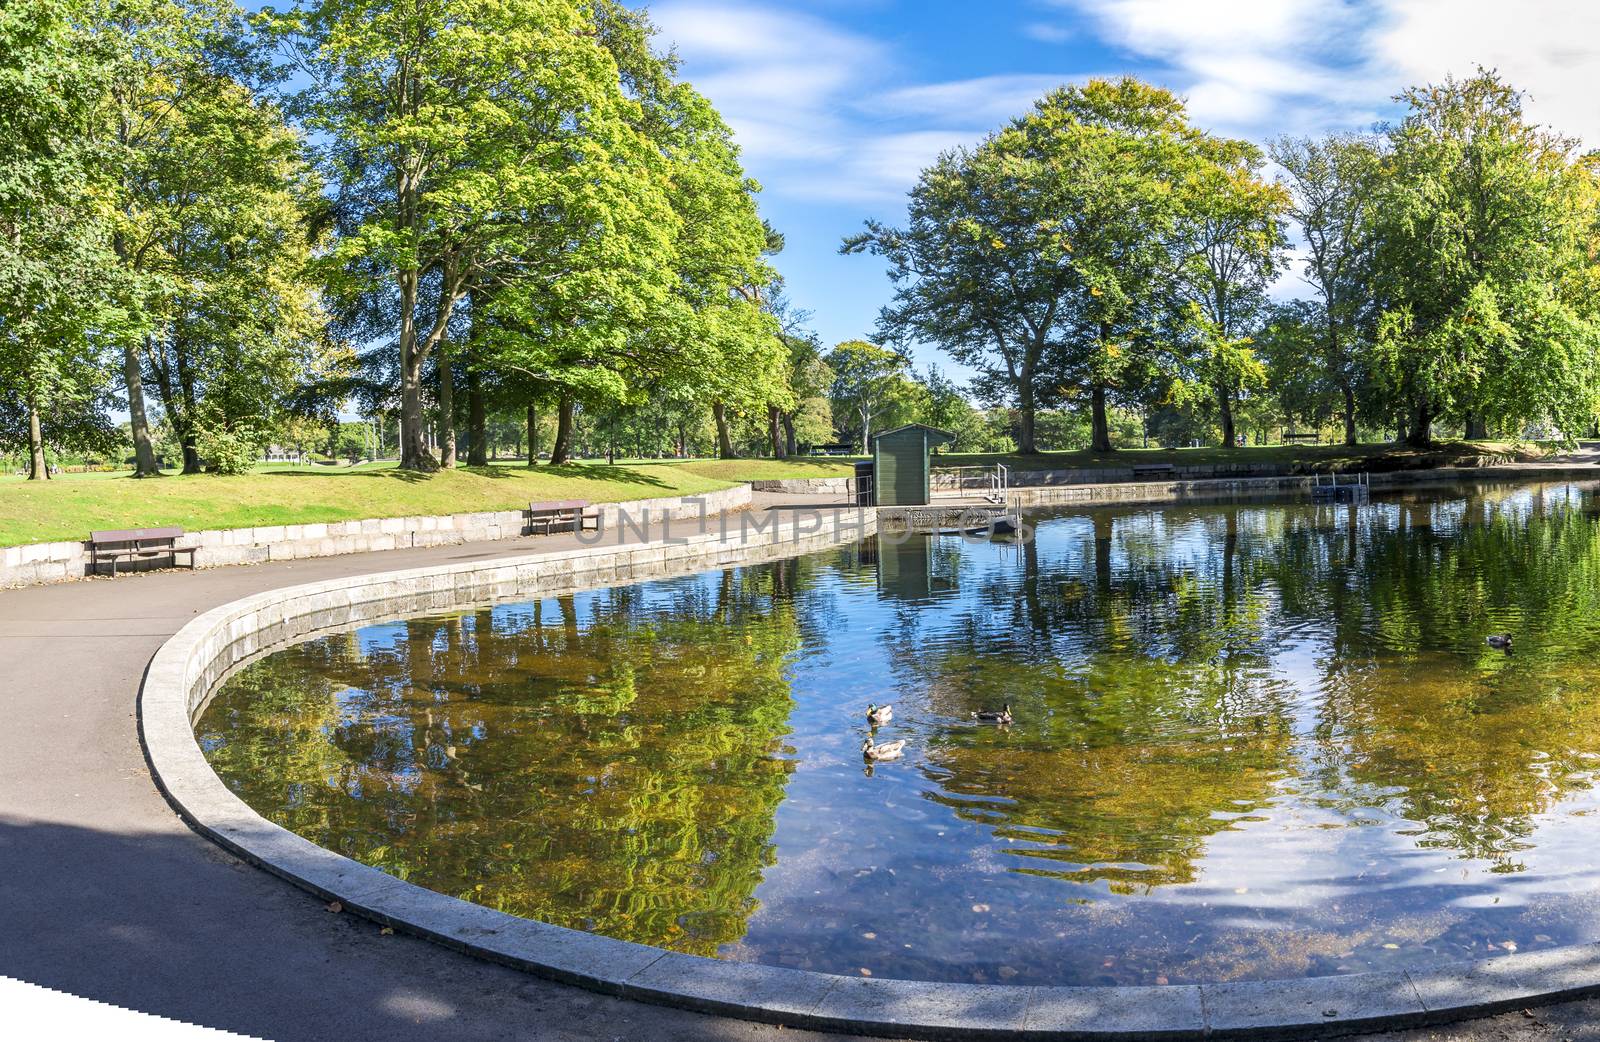 A view of a small shallow pond in the centre of Duthie Park, Aberdeen, Scotland by anastasstyles